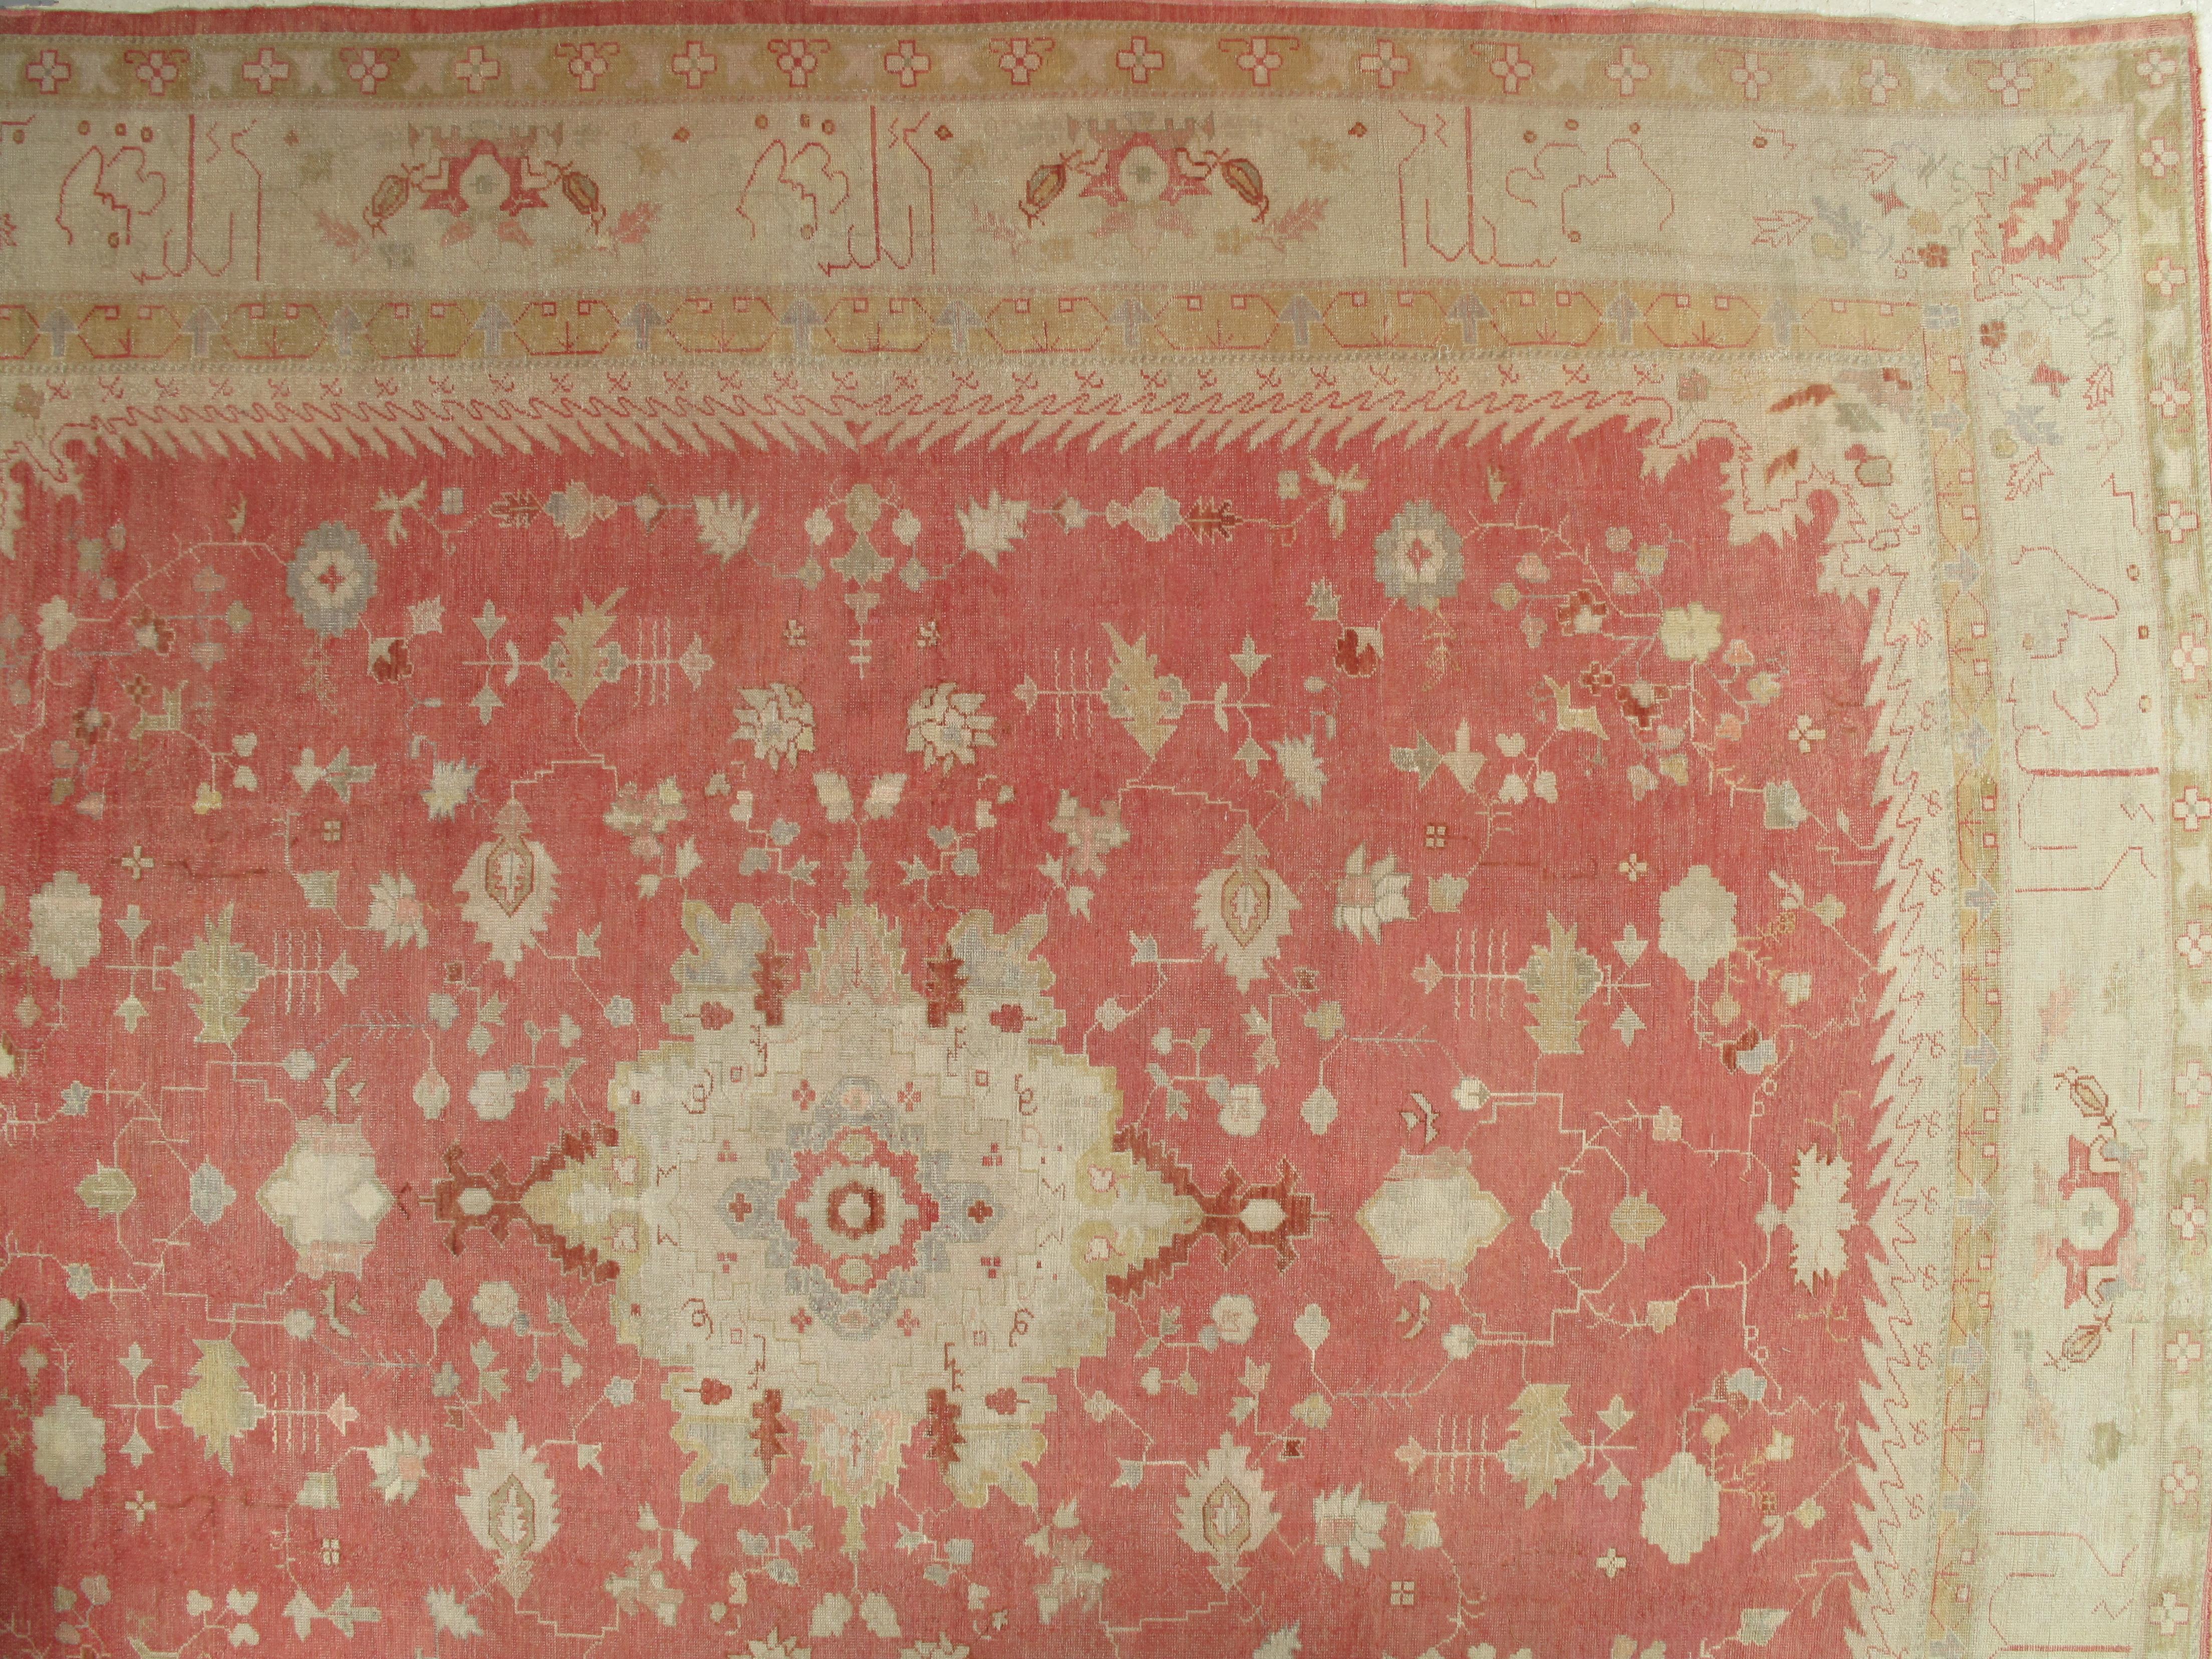 Antique Oushak Carpet, Handmade Turkish Oriental Rug, Beige, Coral, Soft Colors In Good Condition For Sale In Port Washington, NY